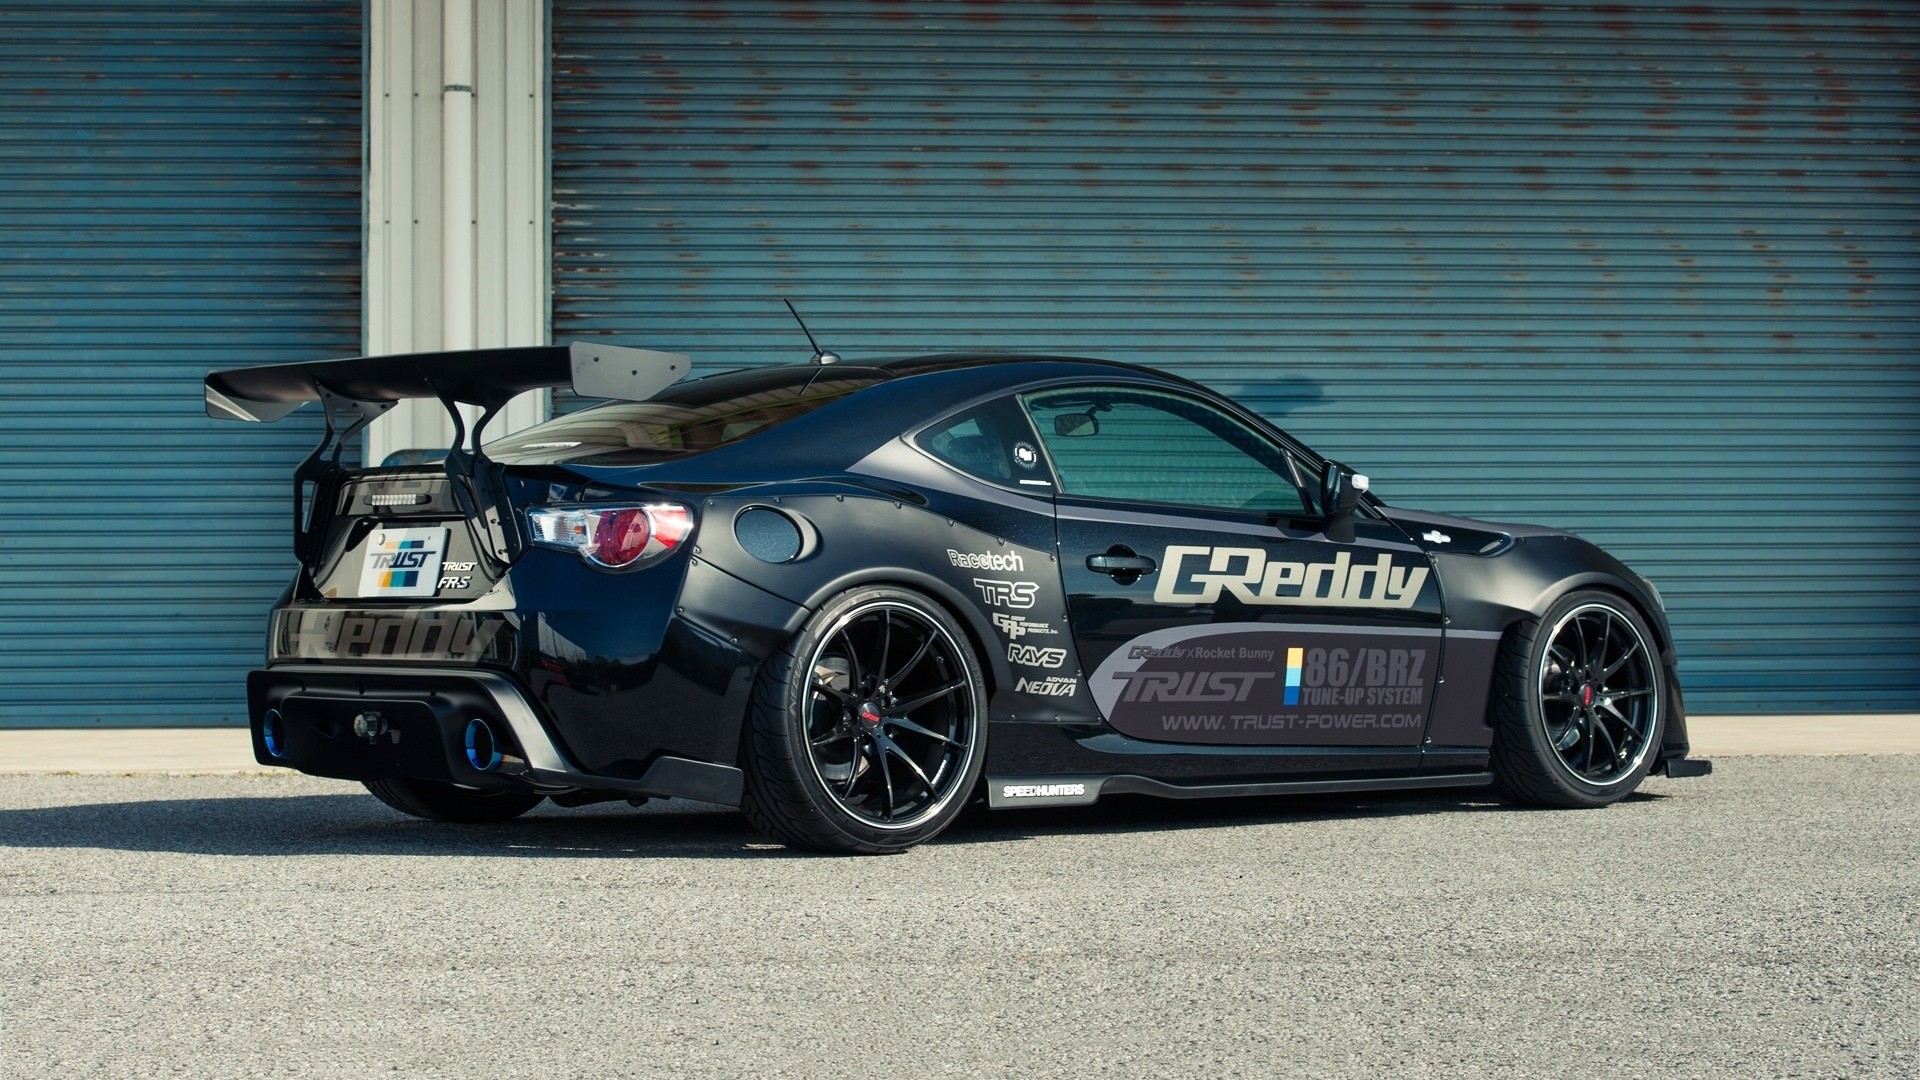 1920x1080 Description: The Wallpaper above is Greddy scion frs Wallpaper in  Resolution . Choose your Resolution and Download Greddy scion frs  Wallpaper